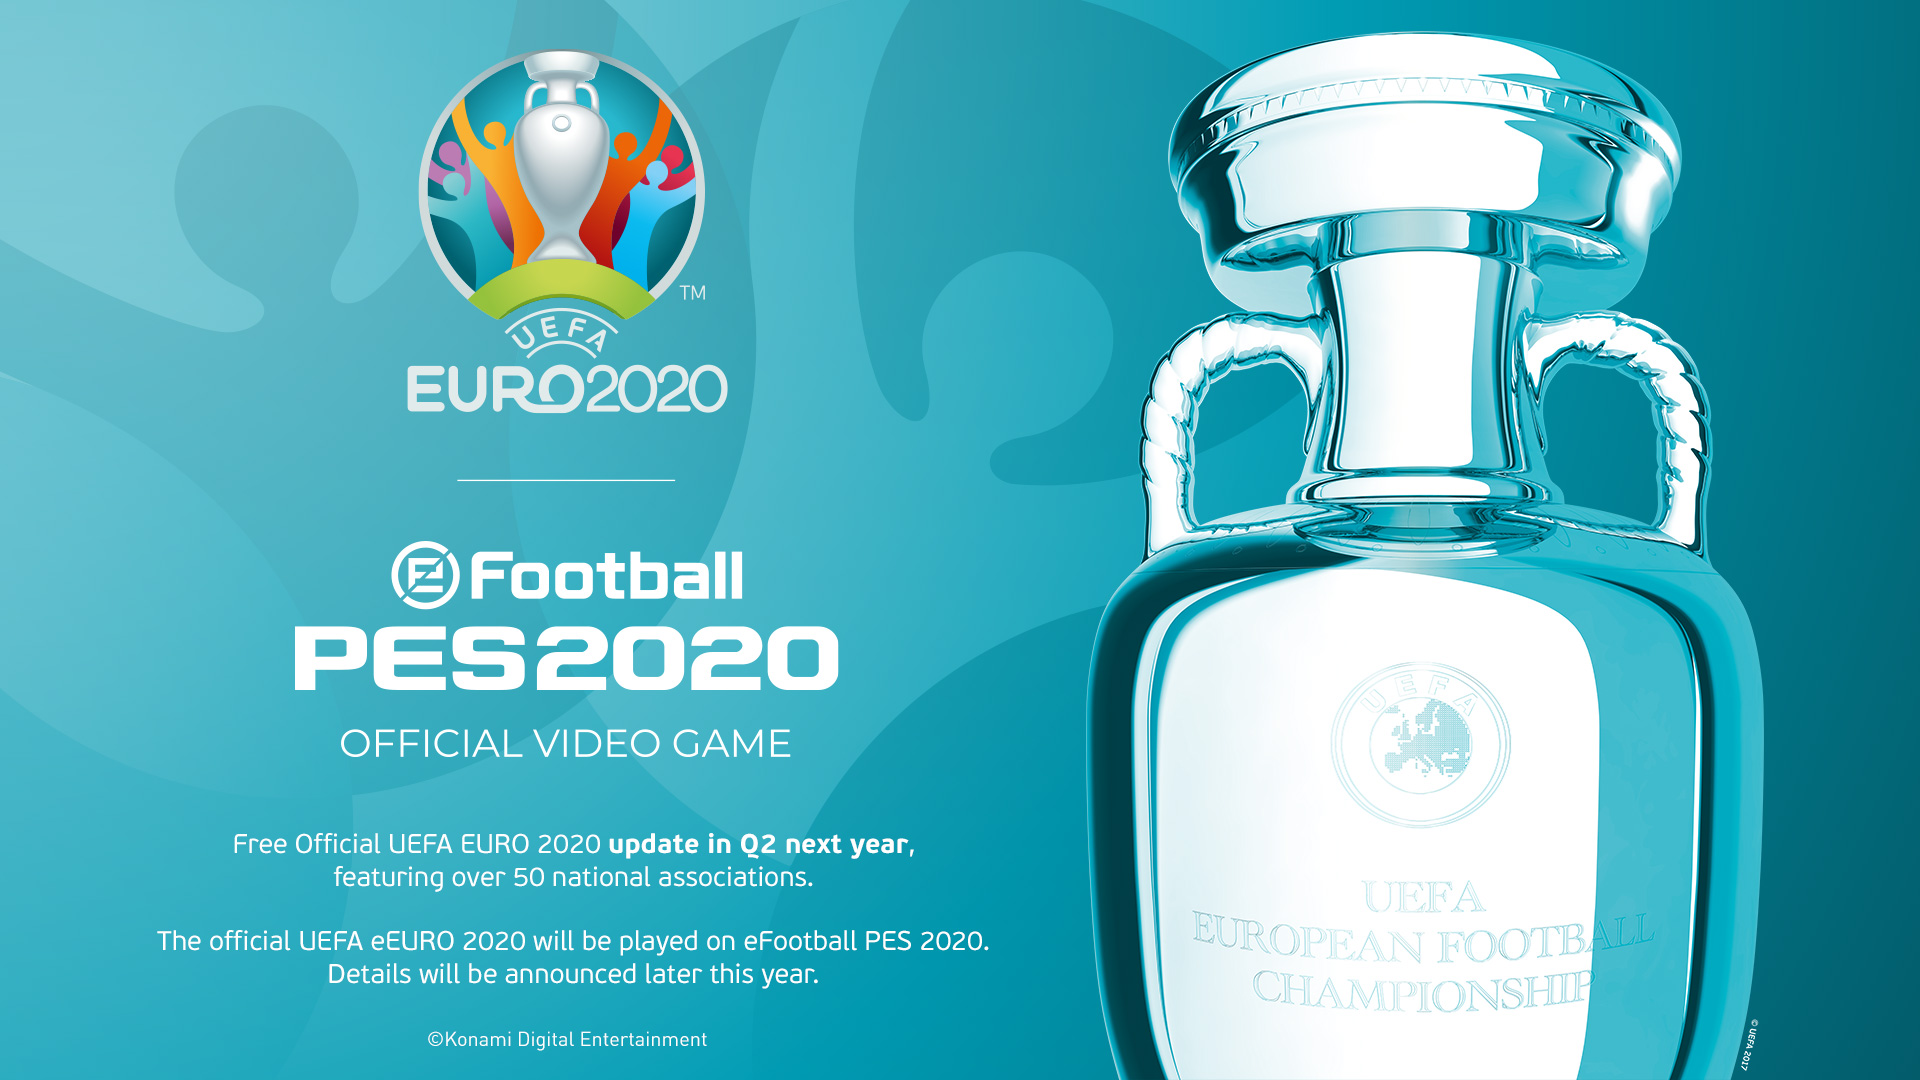 eFootball PES 2020 to receive free Official UEFA EURO 2020 update